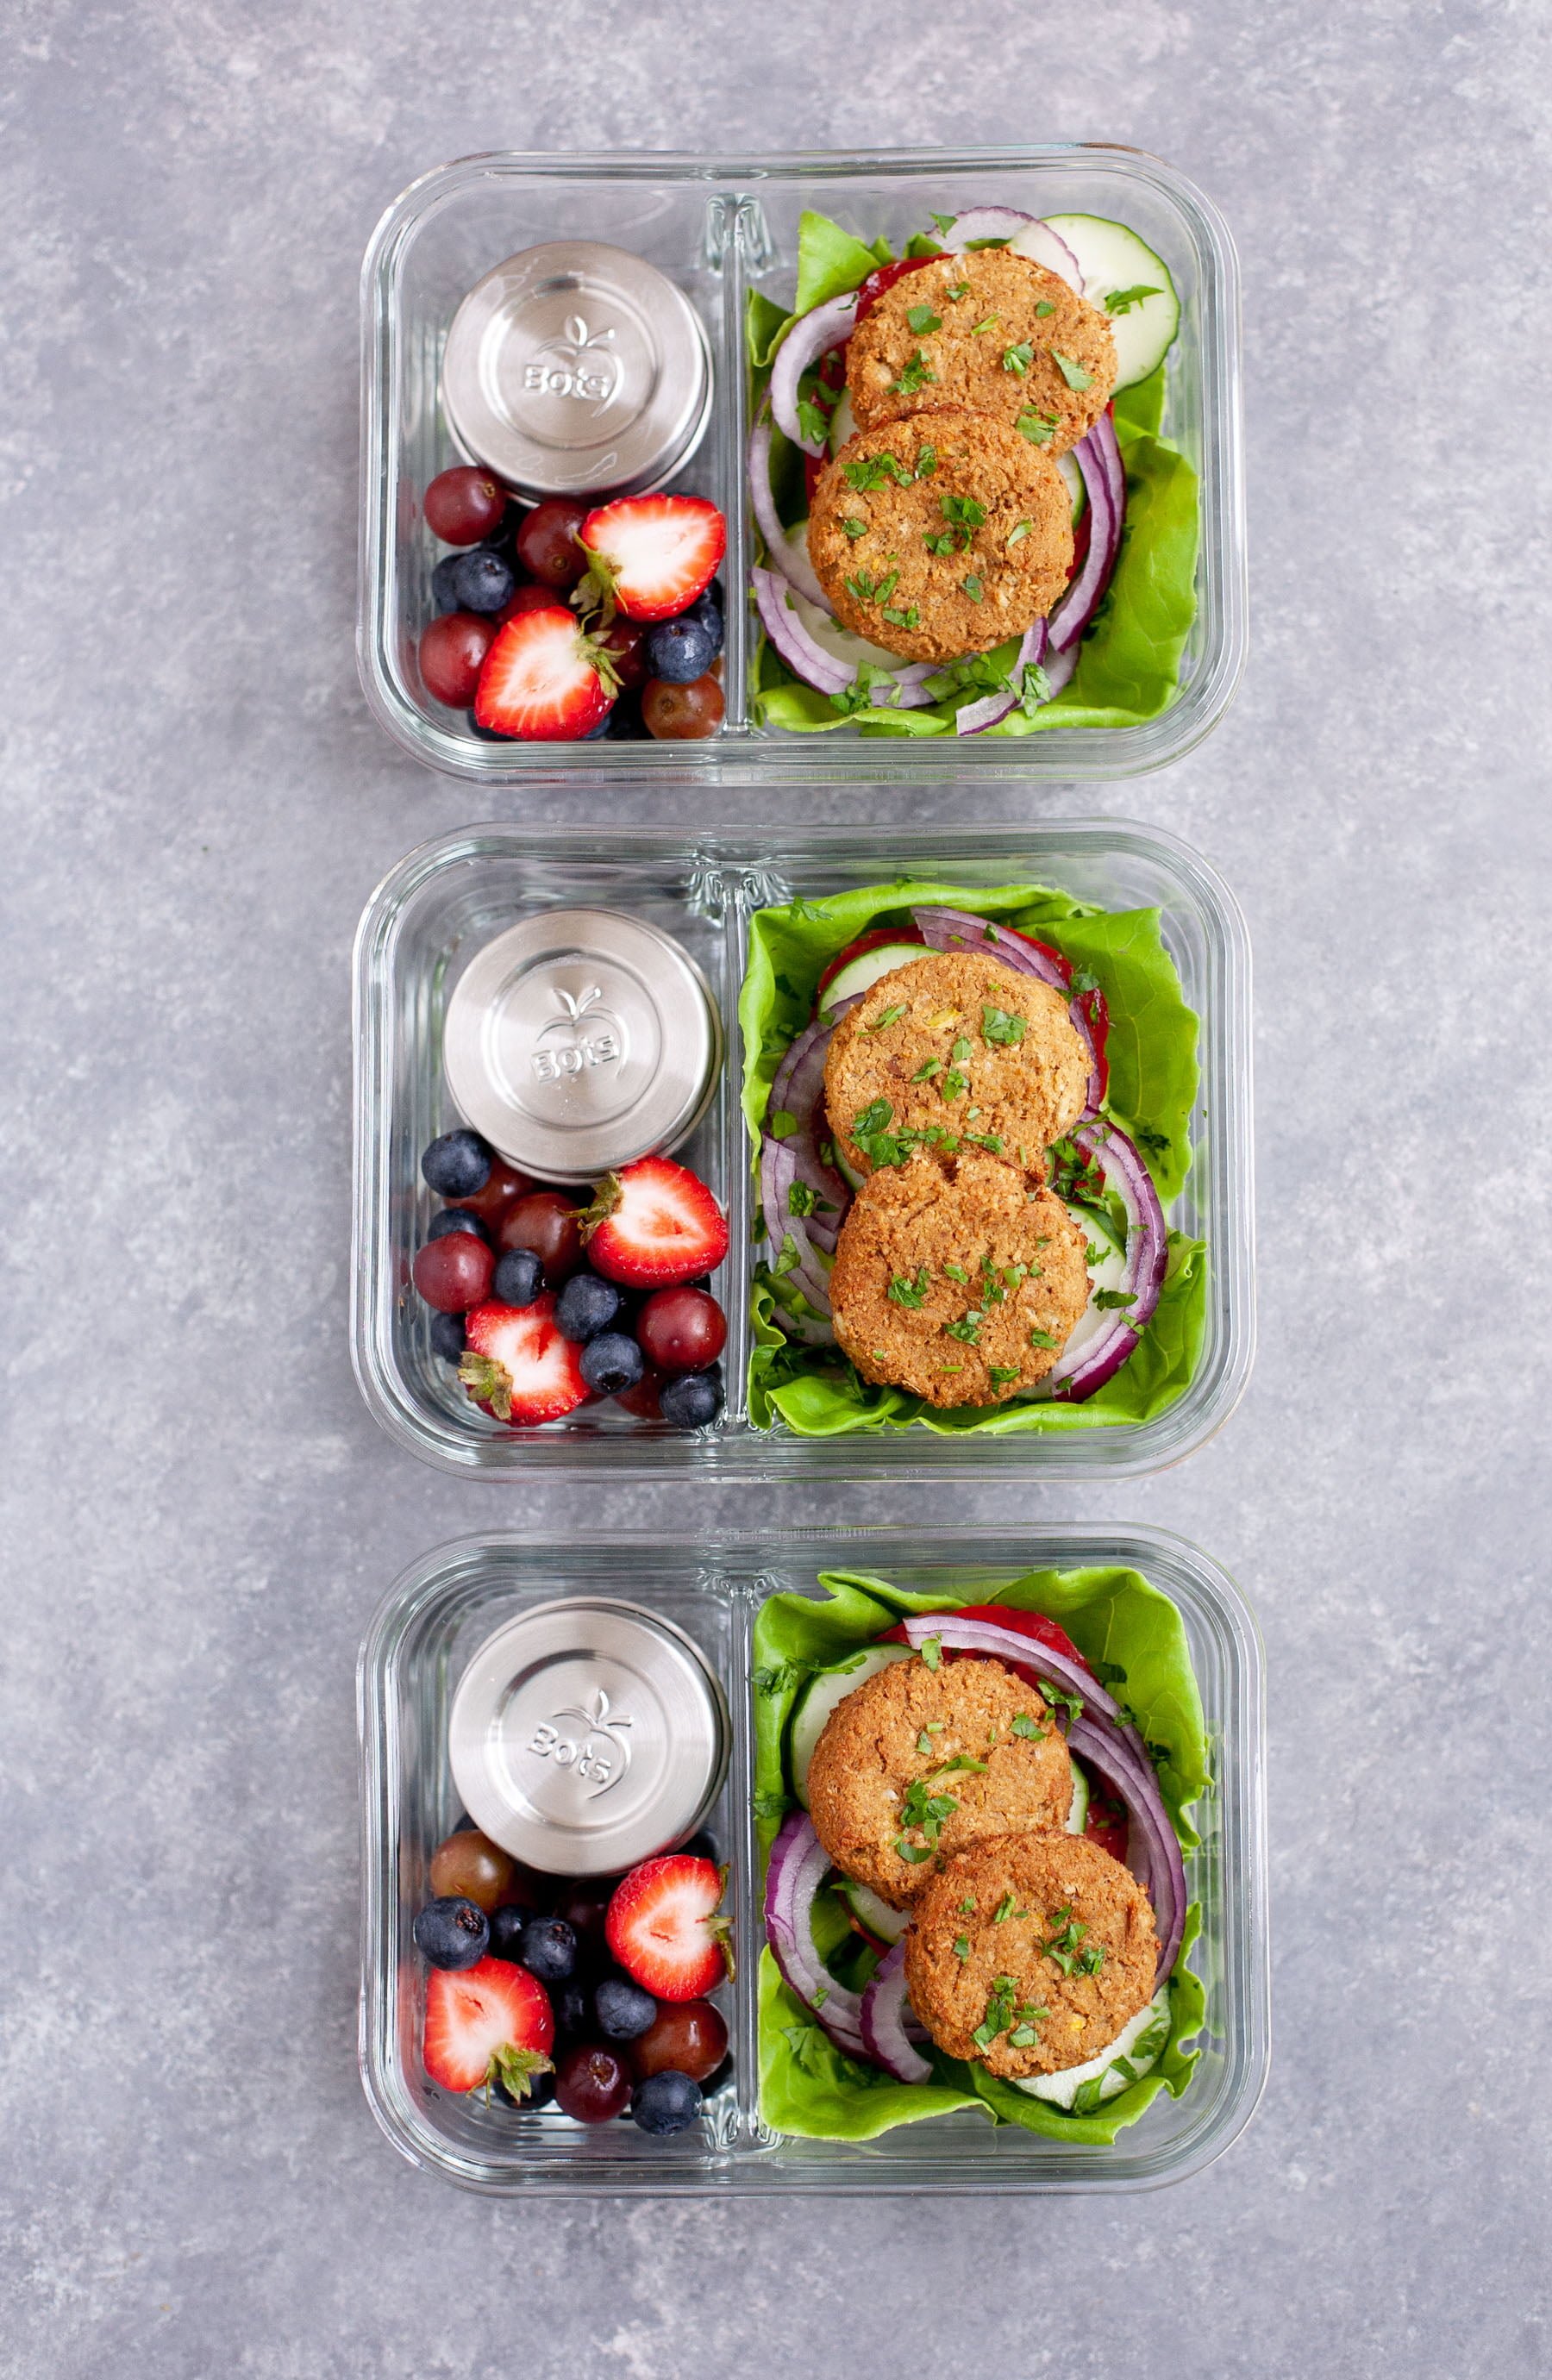 Meal Prep Baked Falafel Lettuce Wraps packed into glass lunch containers with mixed berries and small containers of tahini sauce